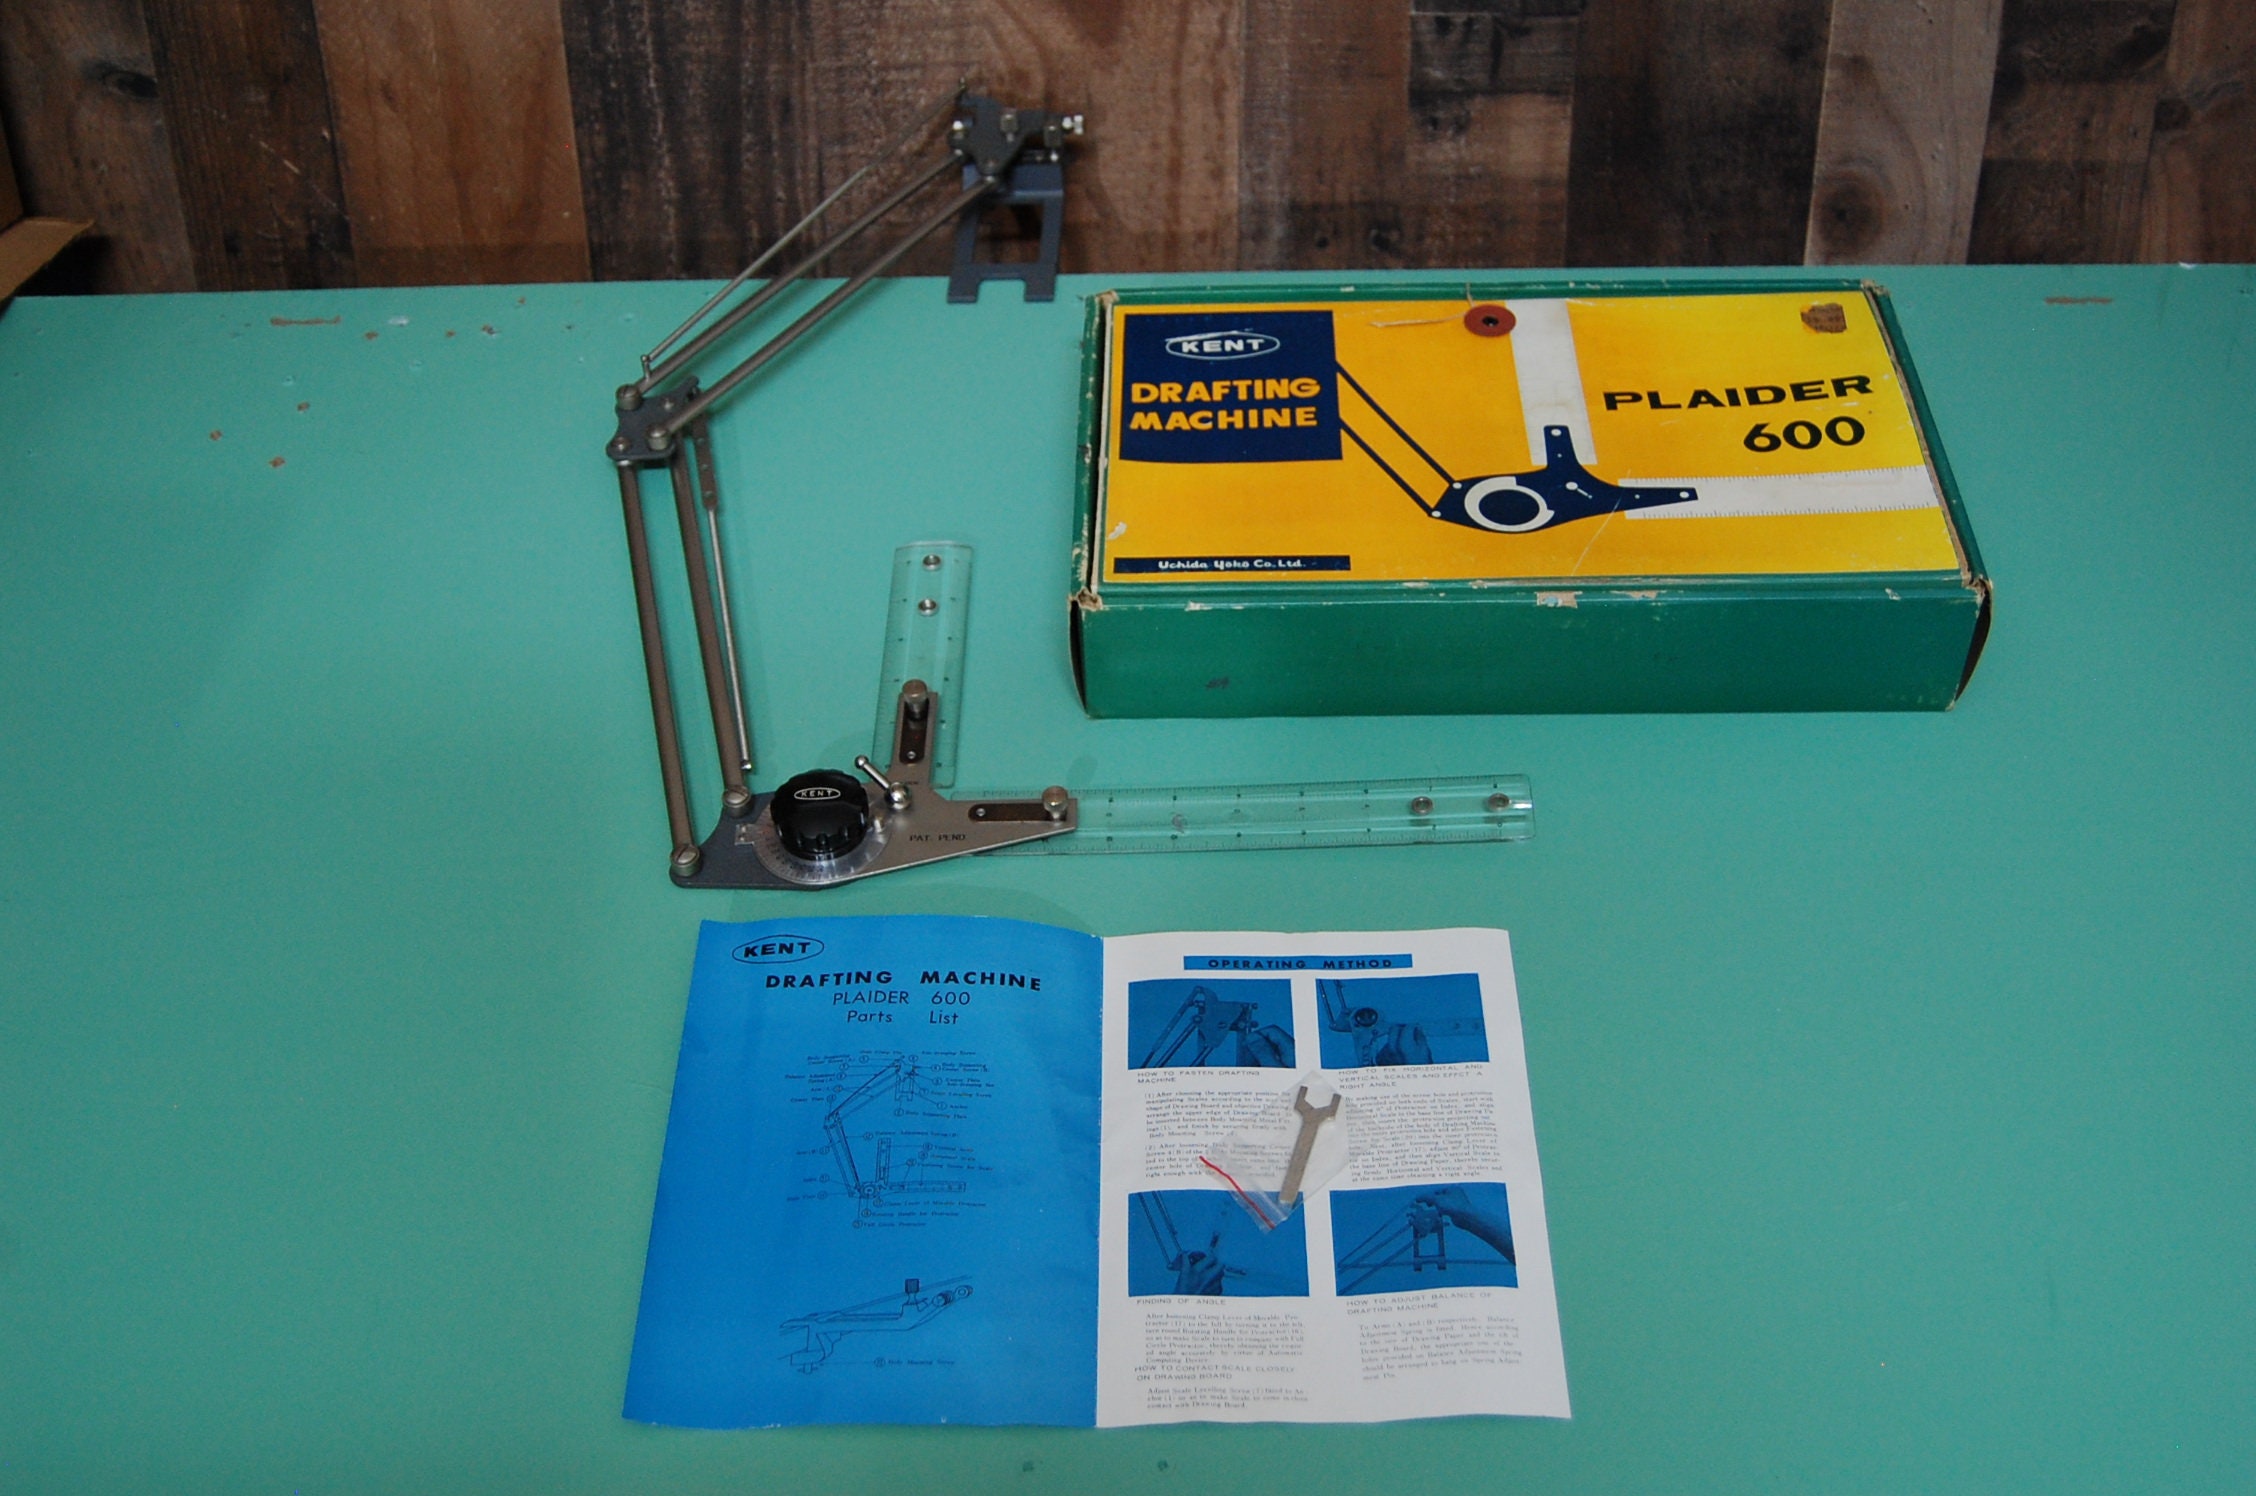 Vintage Drafting Machine, Alvin Plaider 600 Drafting Machine, 2 Drafting  Scales, Owners Manual and Original Box, Excellent, FREE SHIPPING 